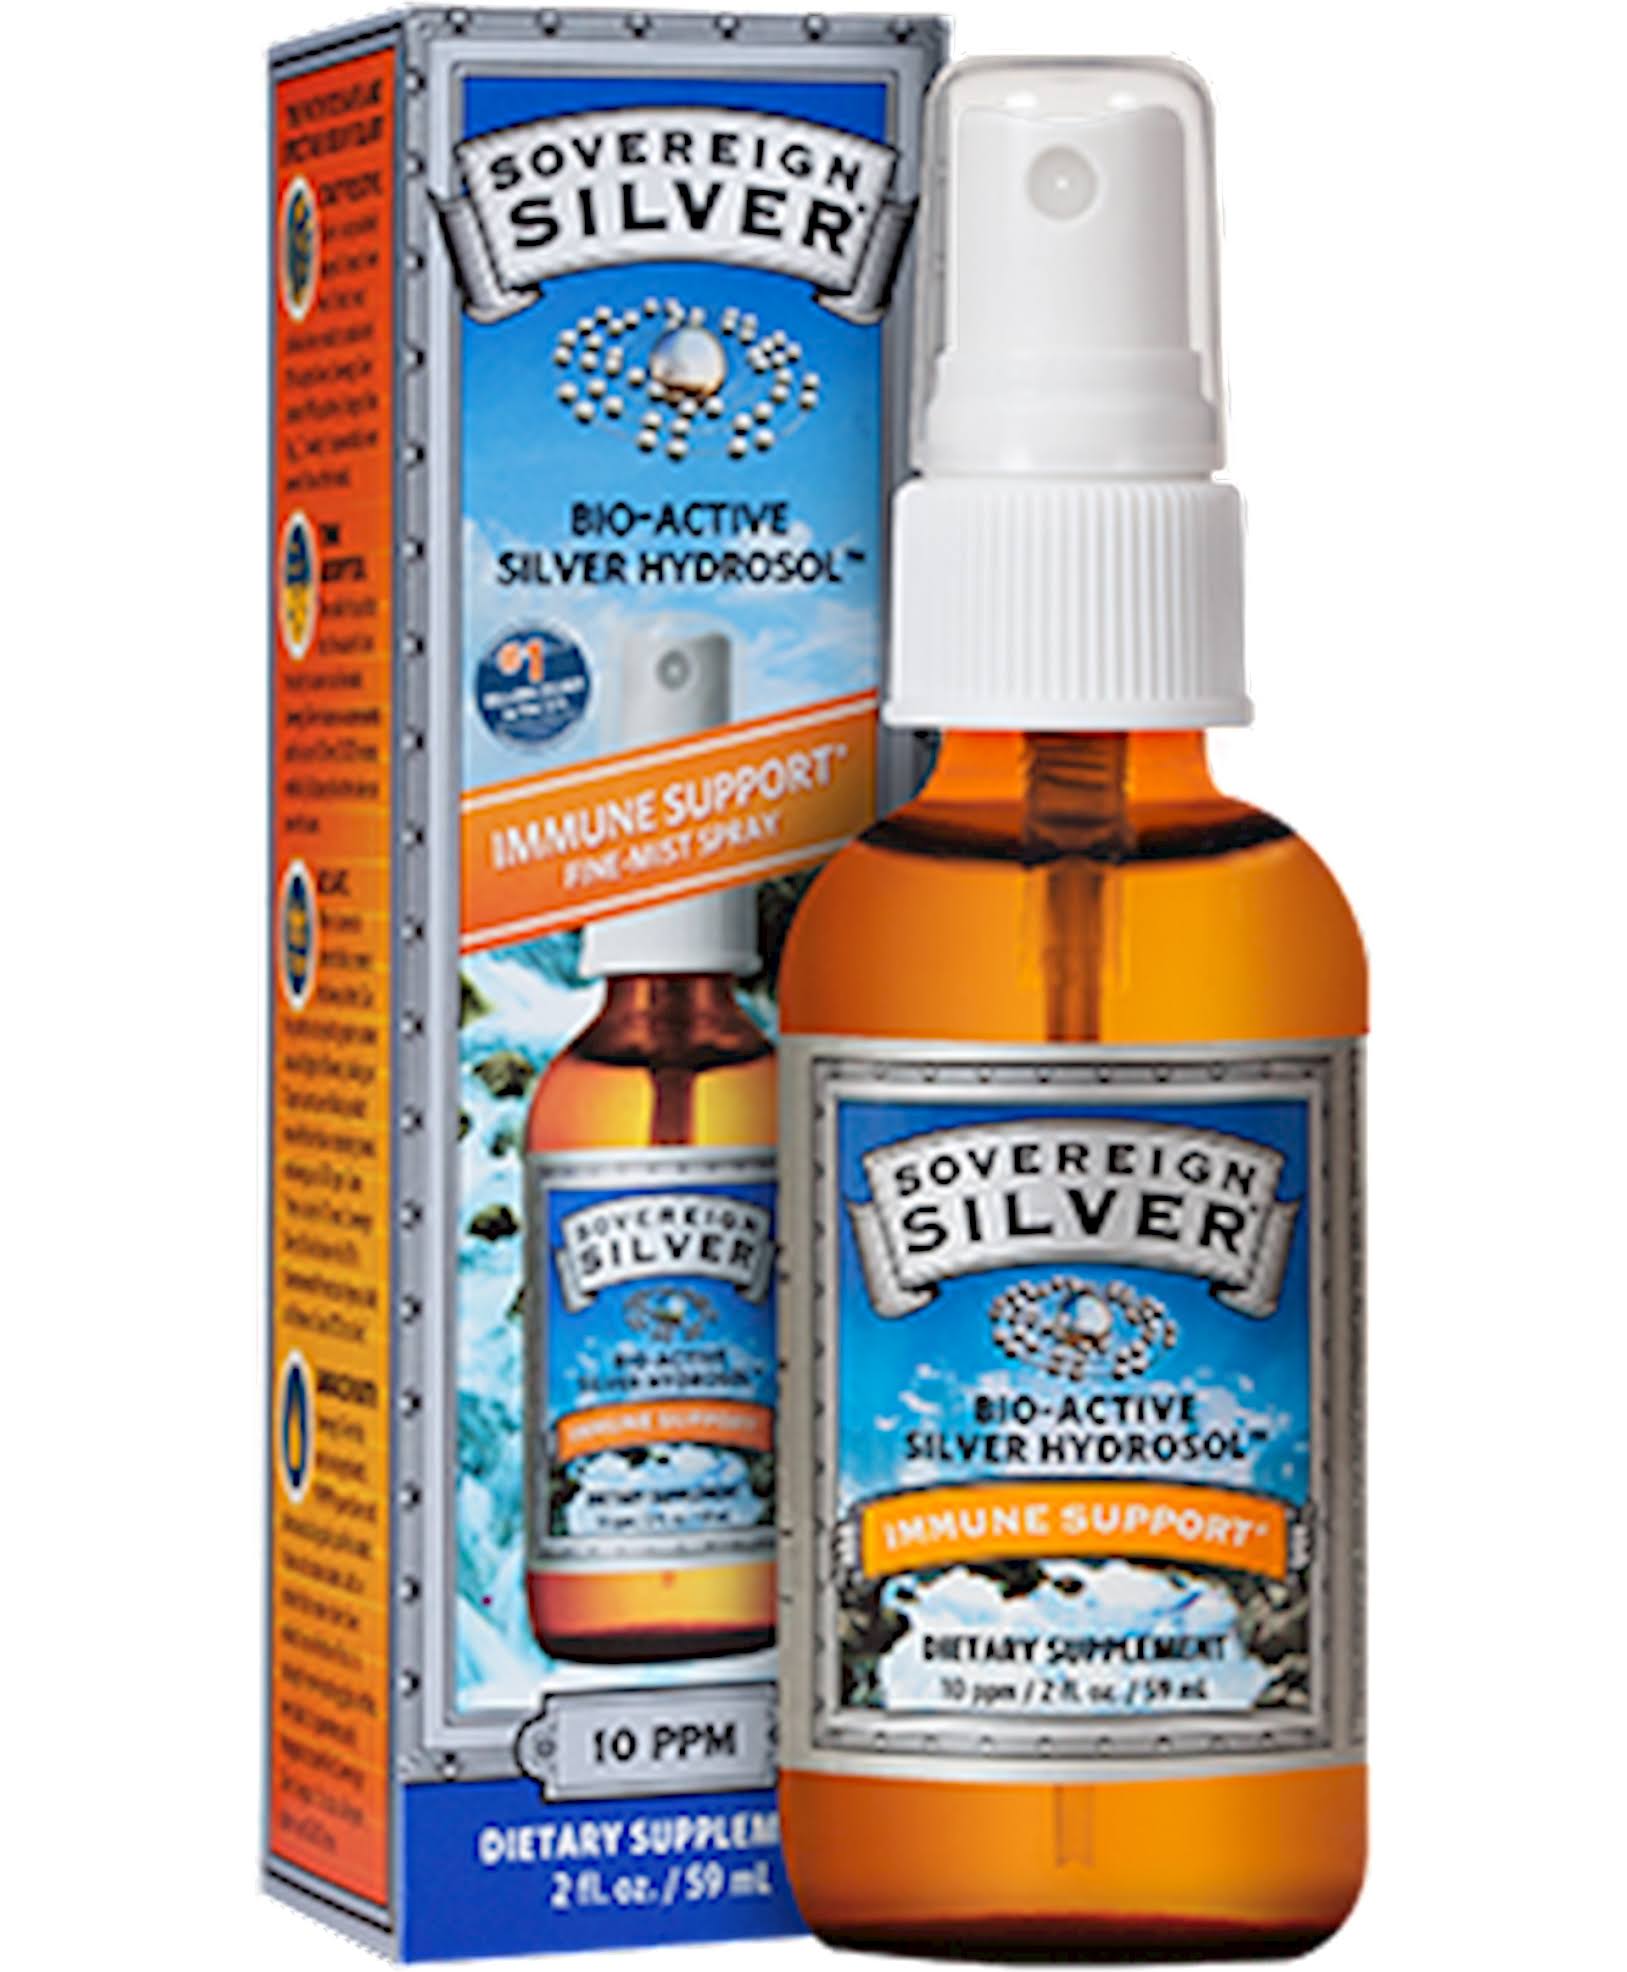 Sovereign Silver Bio-Active Silver Hydrosol for Immune Support - 59ml